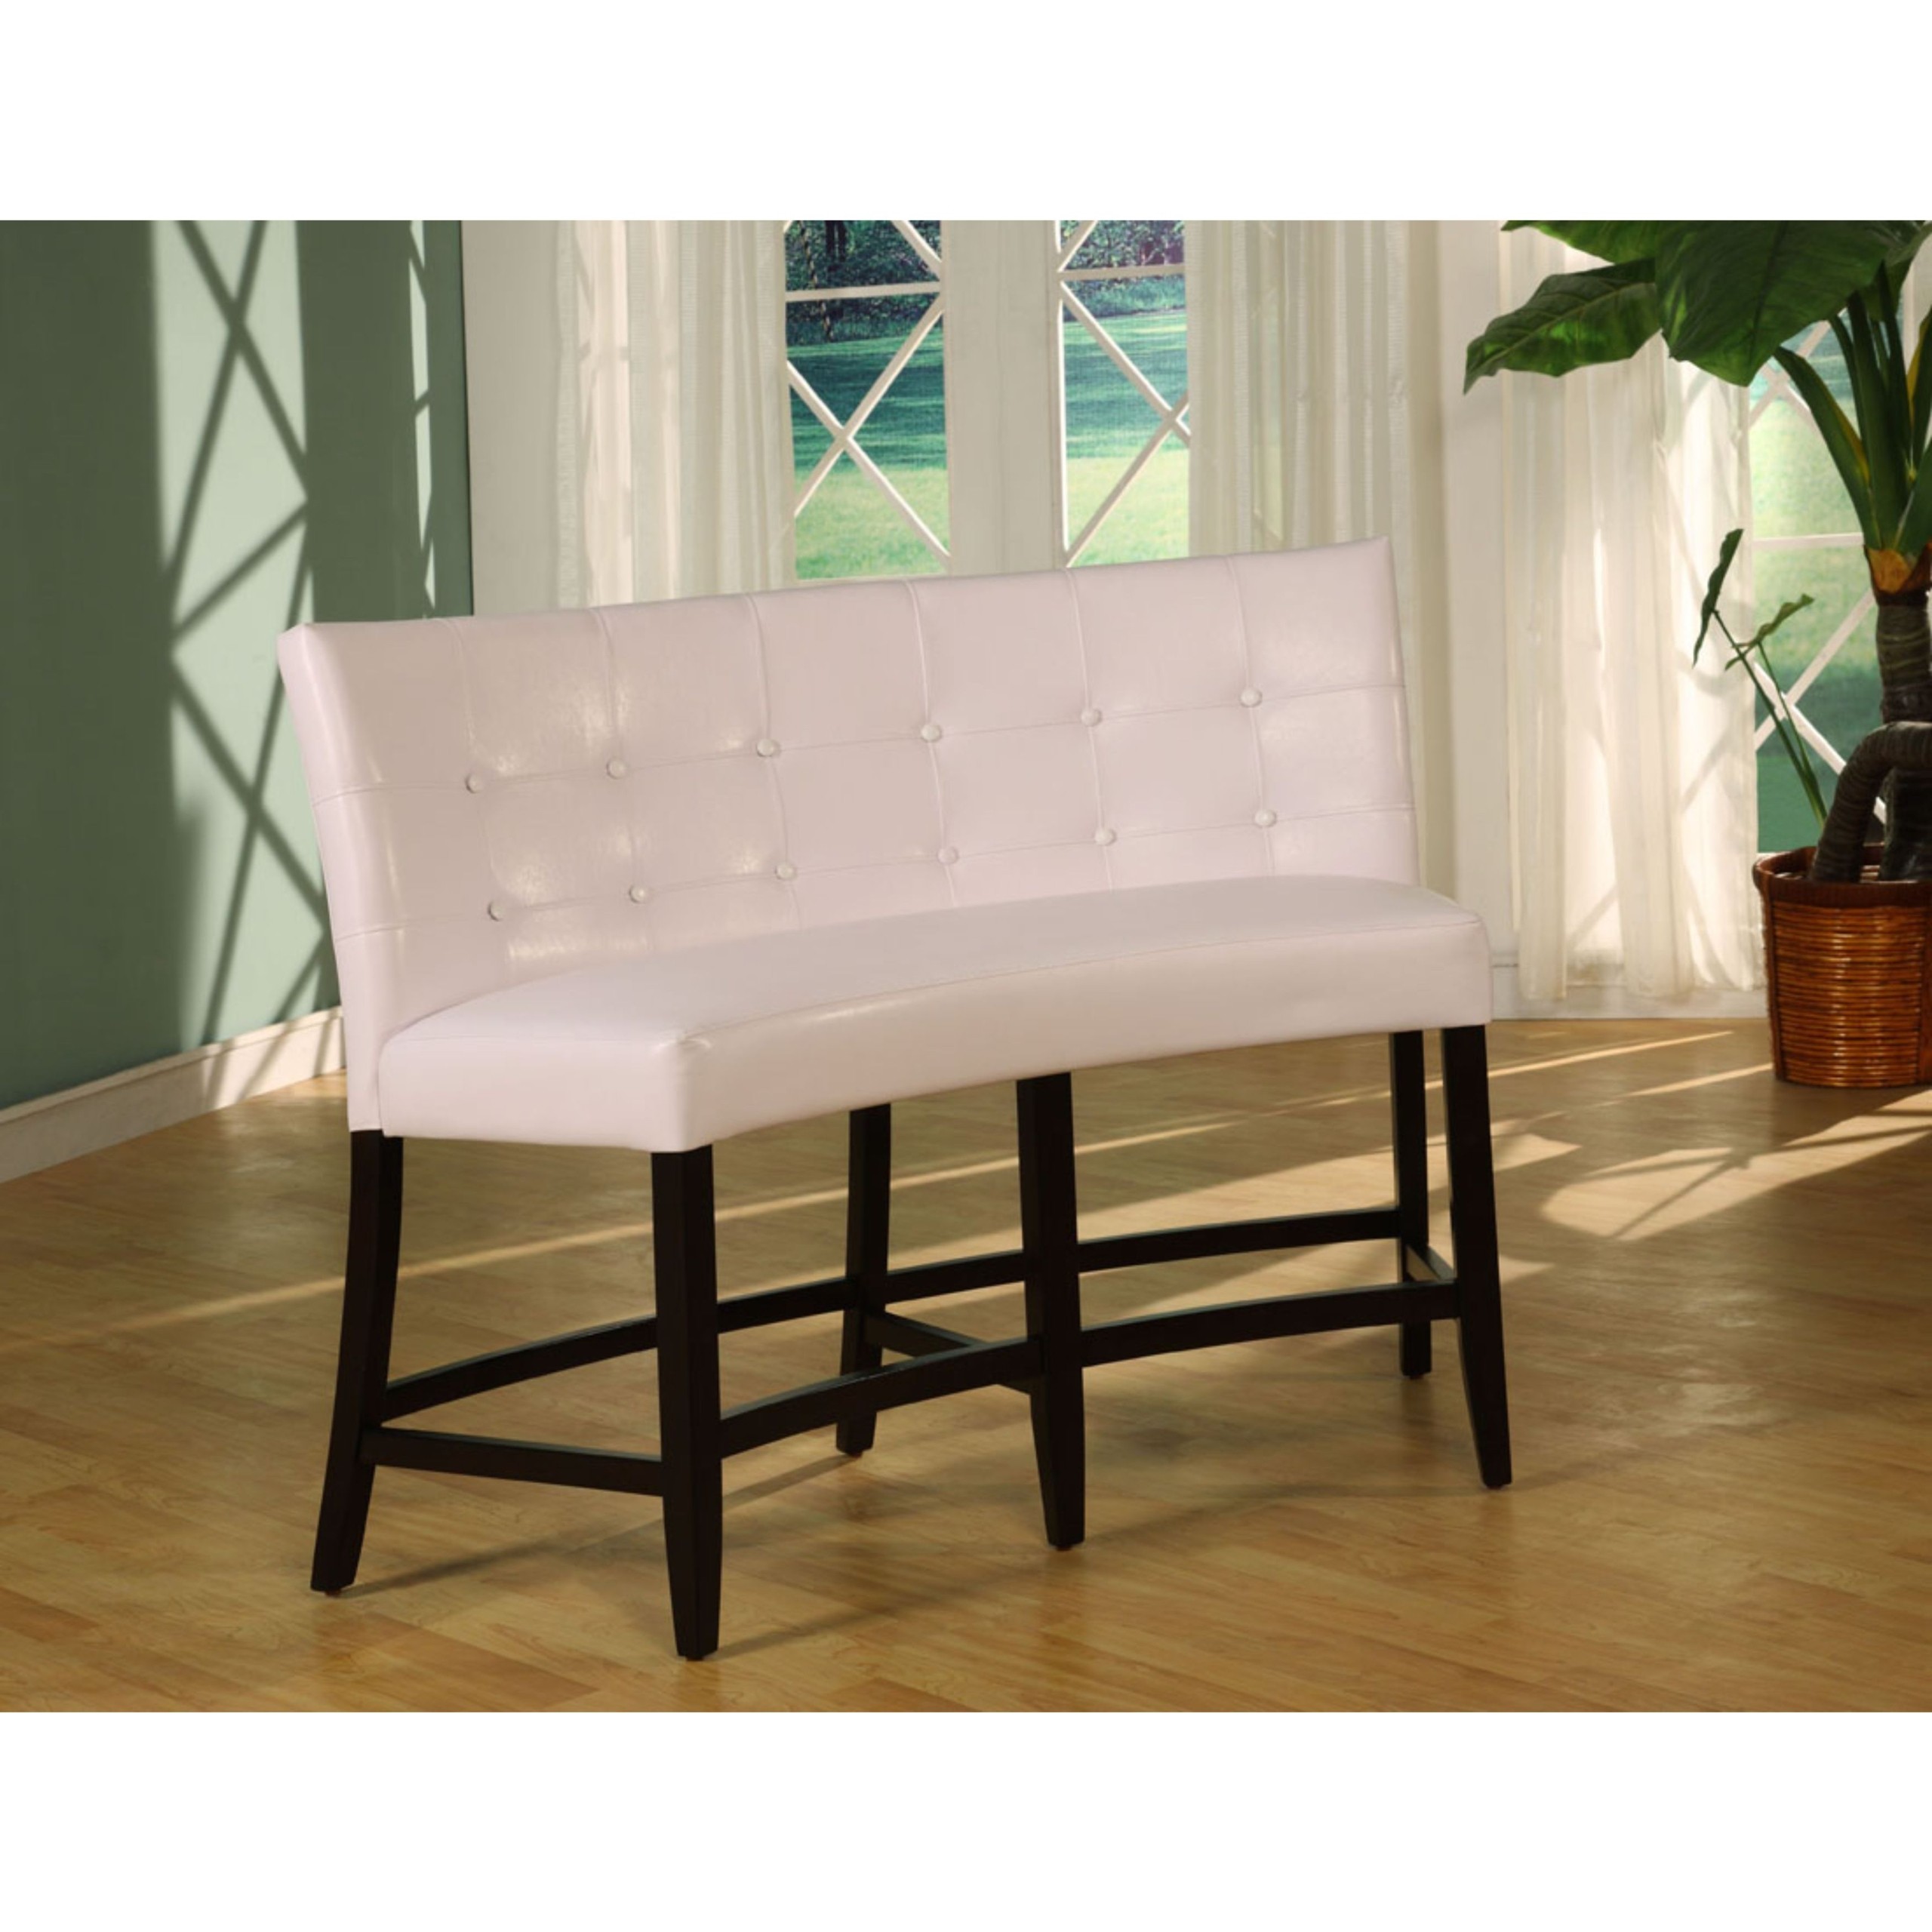 Modus Furniture 2YA470D Bossa Counter Height Banquette, White Leatherette